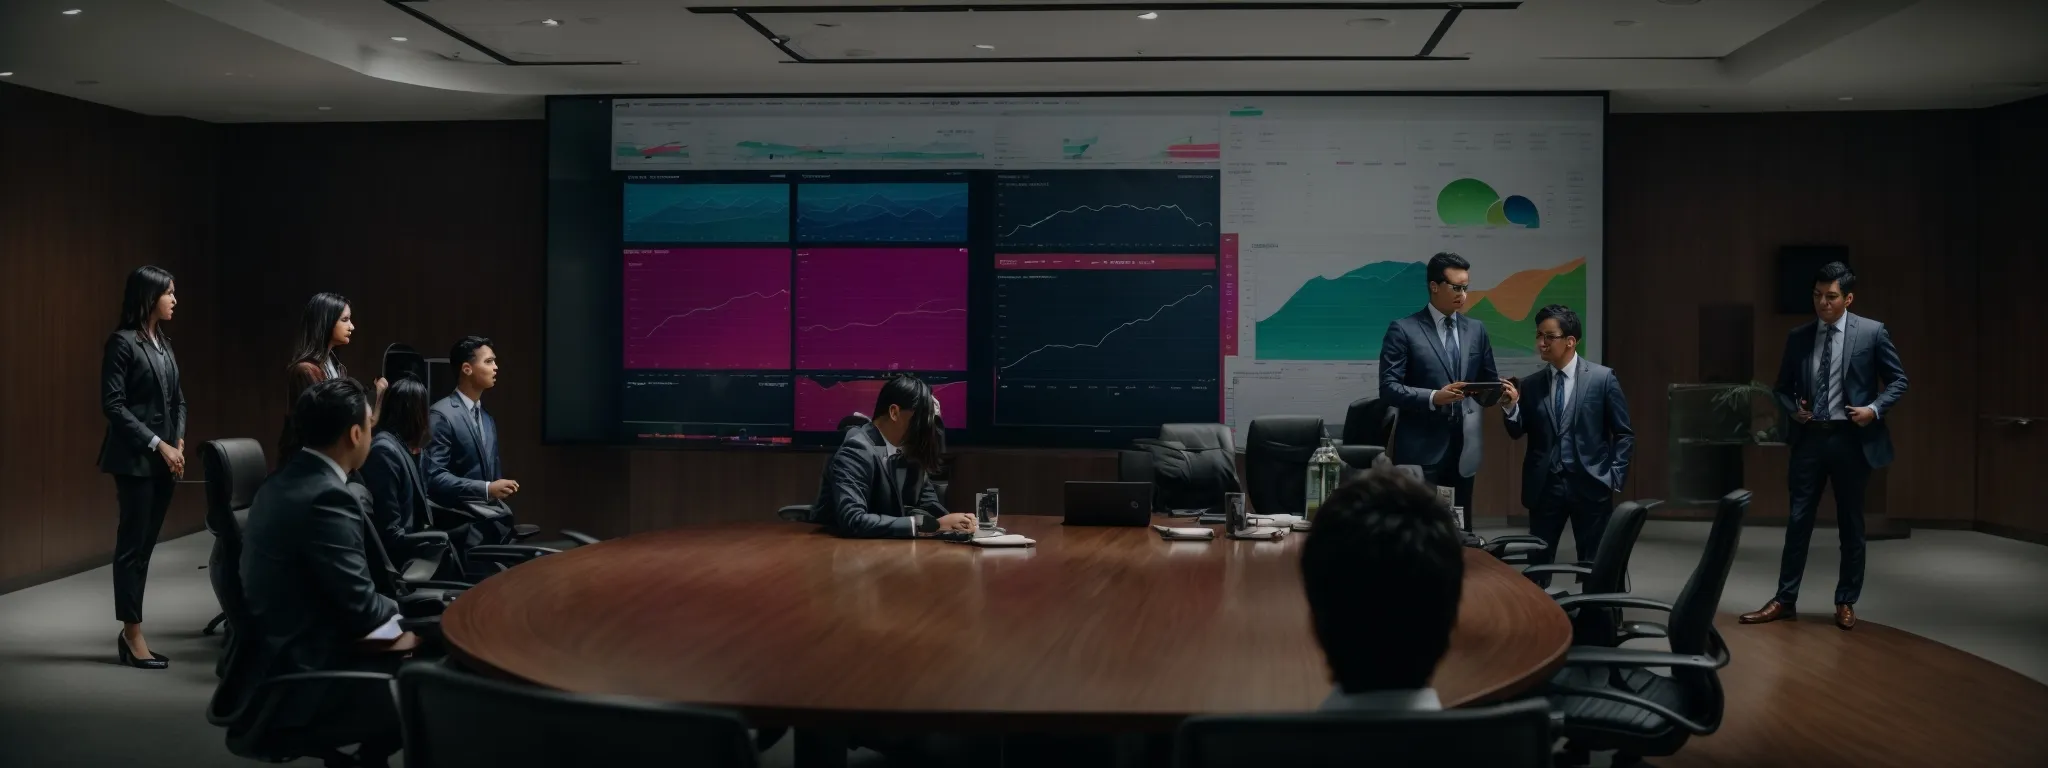 a team in a boardroom reviews a colorful data dashboard display on a large screen, indicating marketing campaign performance.